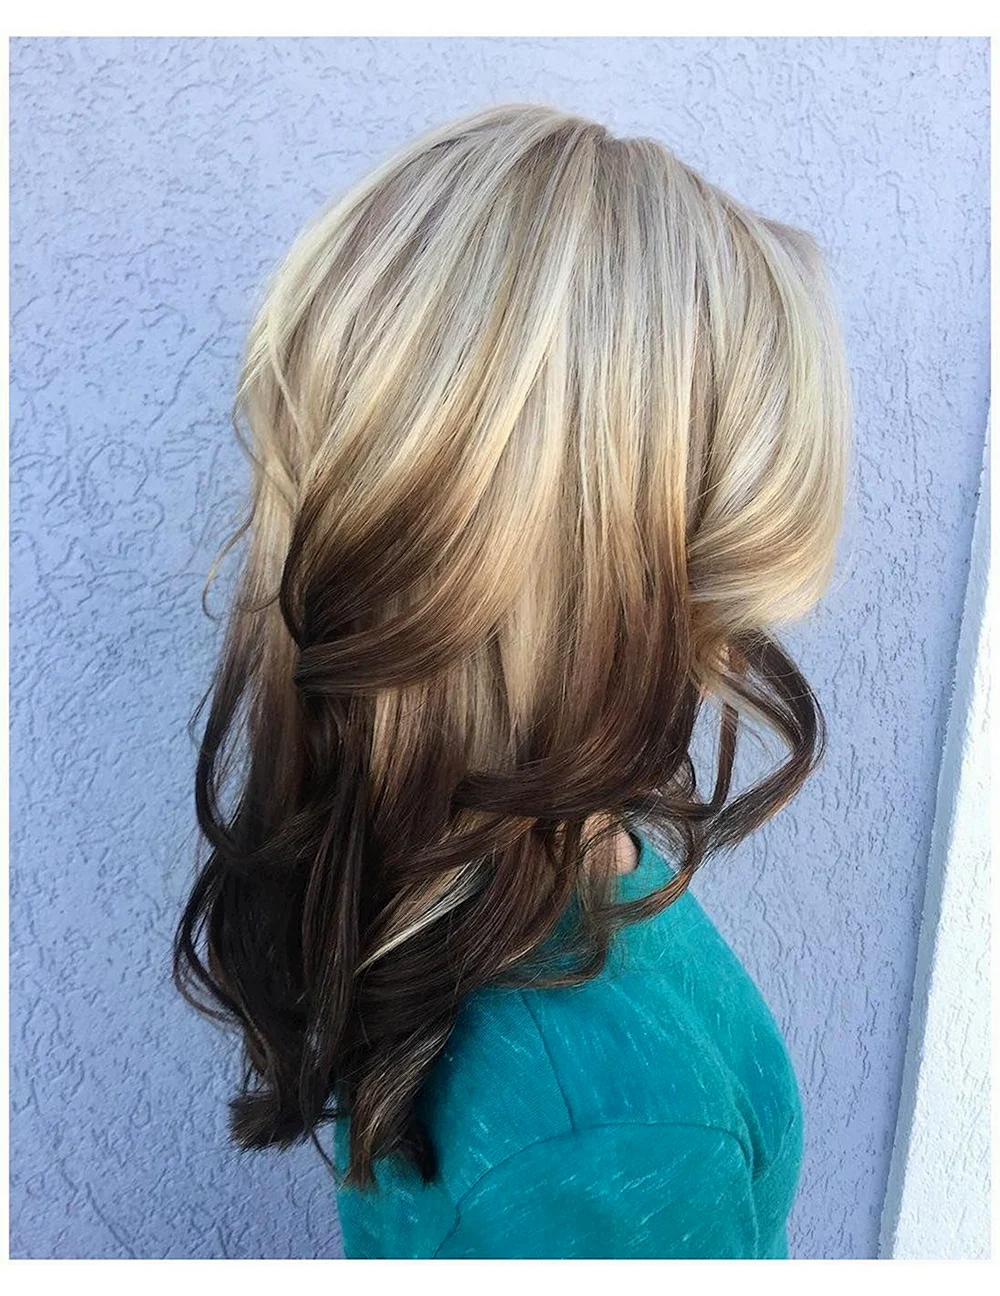 Reverse Ombre hair